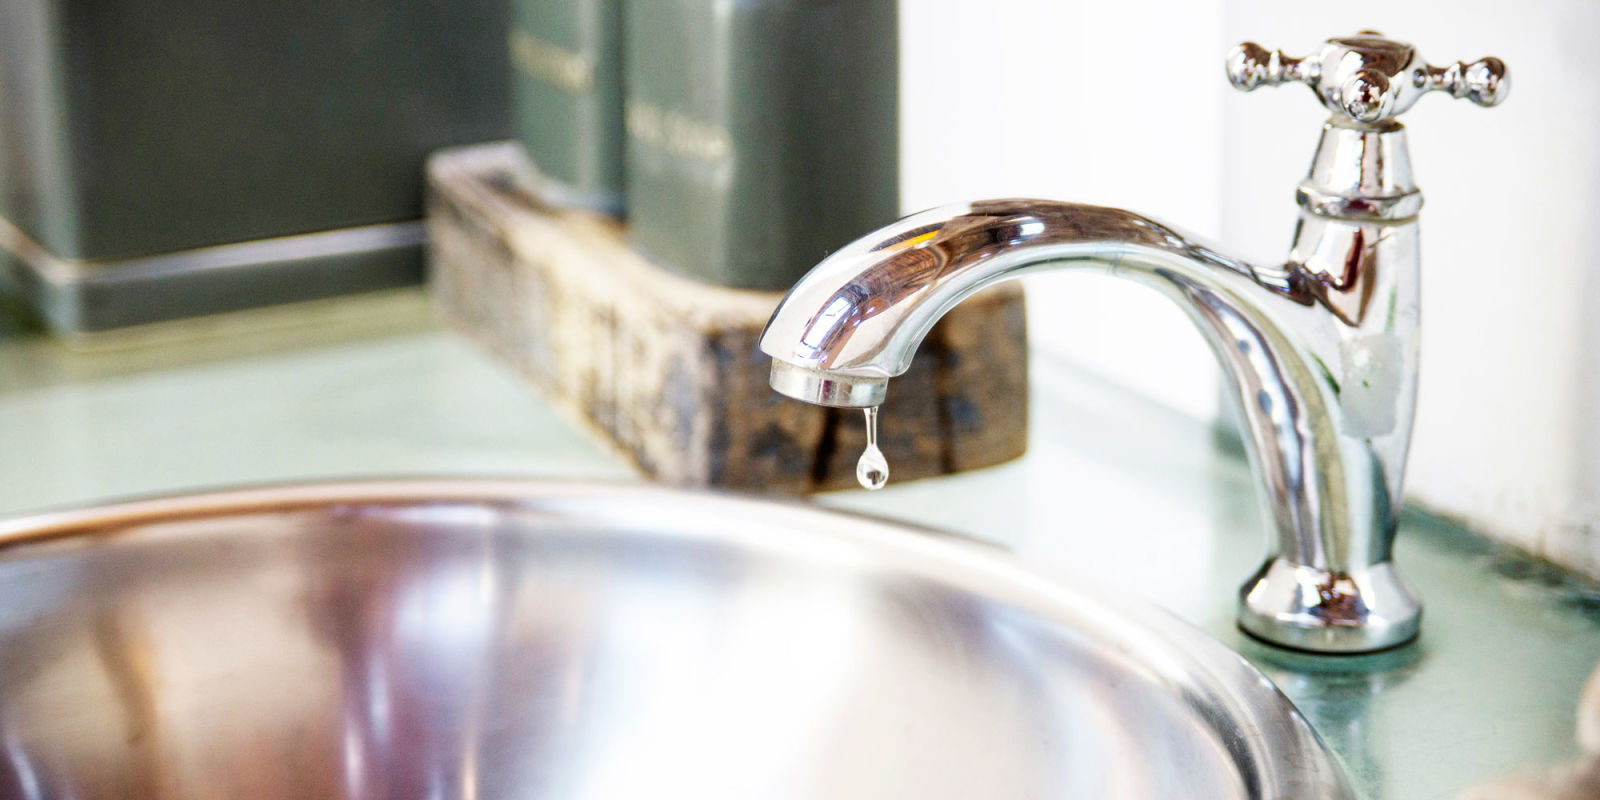 Fix Leaky Faucet in Your Home  Plumbing Information